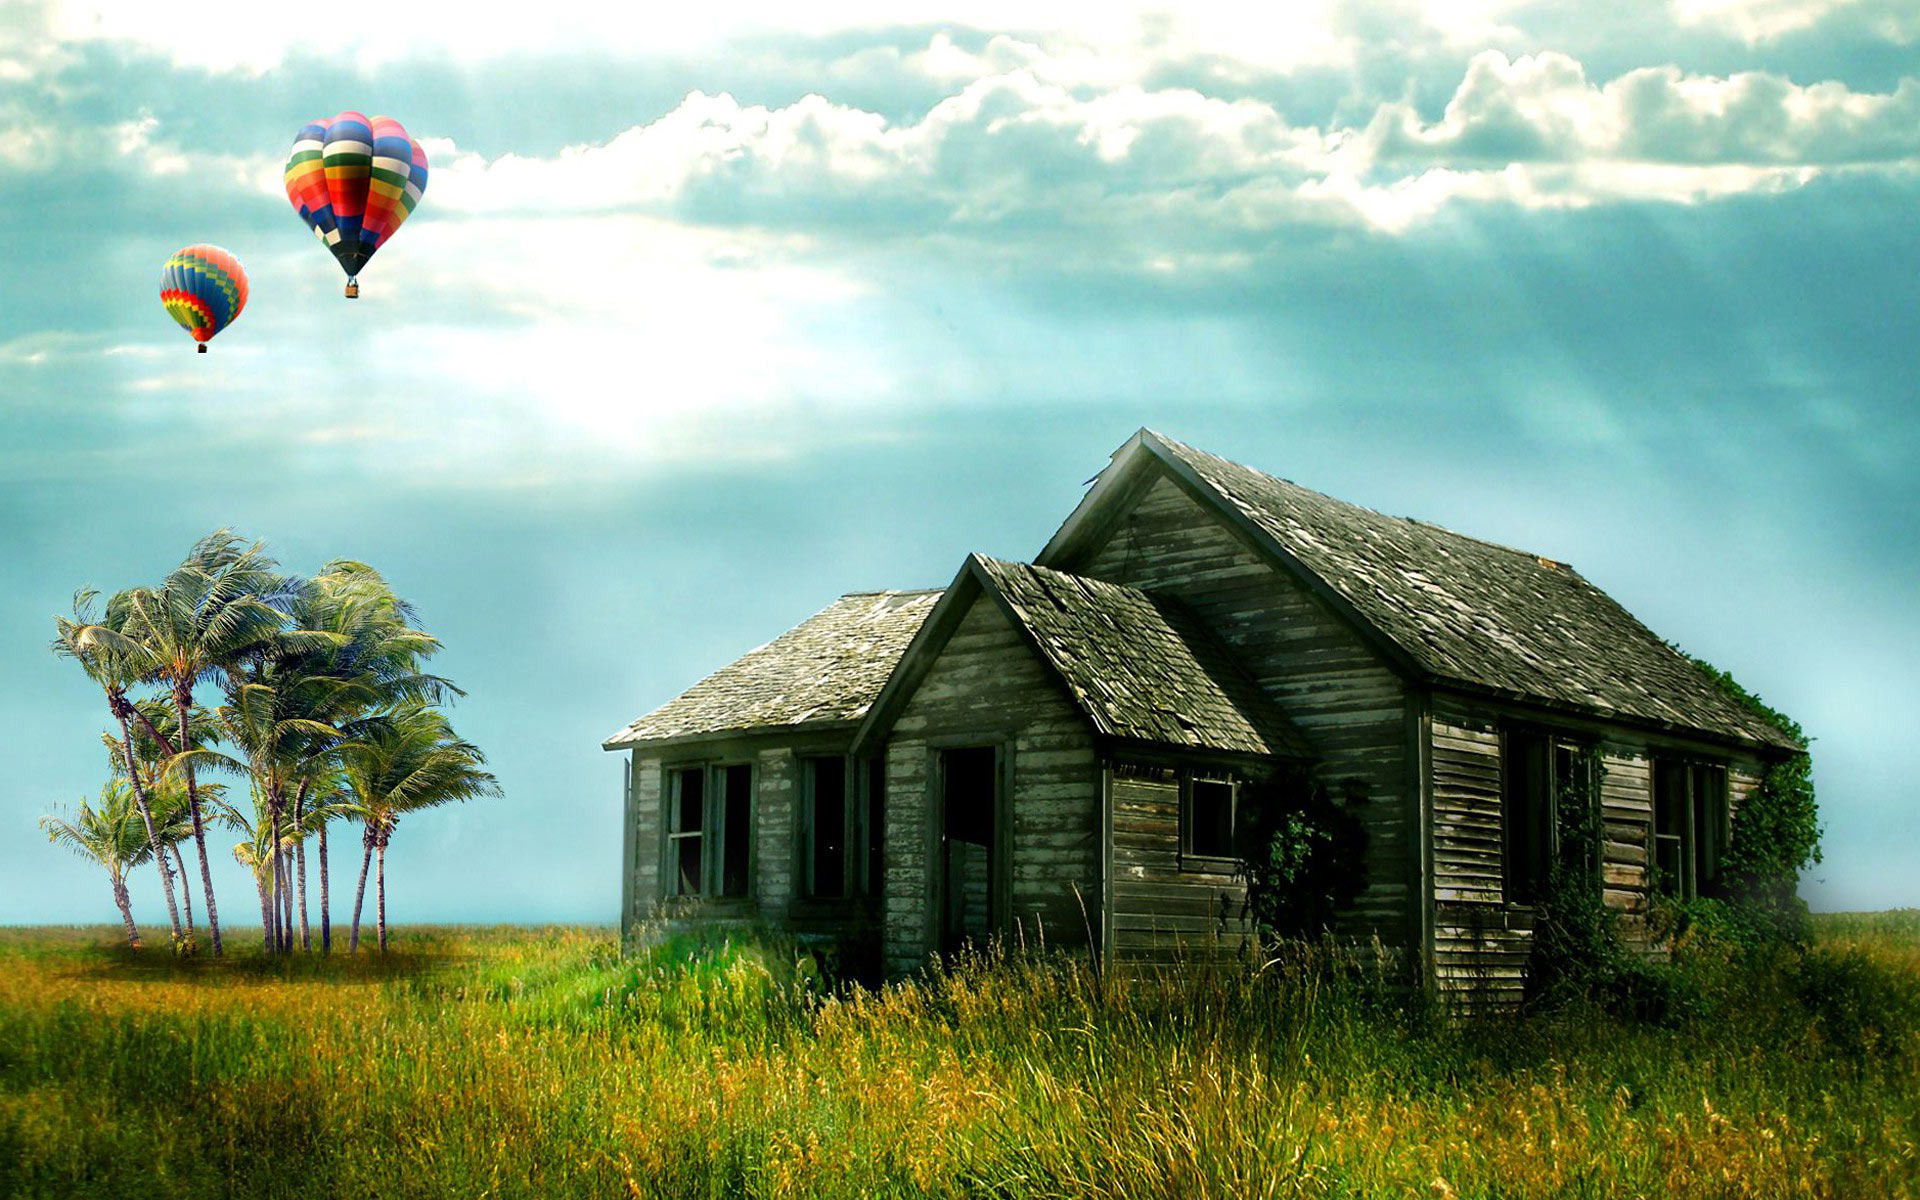 Old house and balloons on the field wallpaper   83890 1920x1200